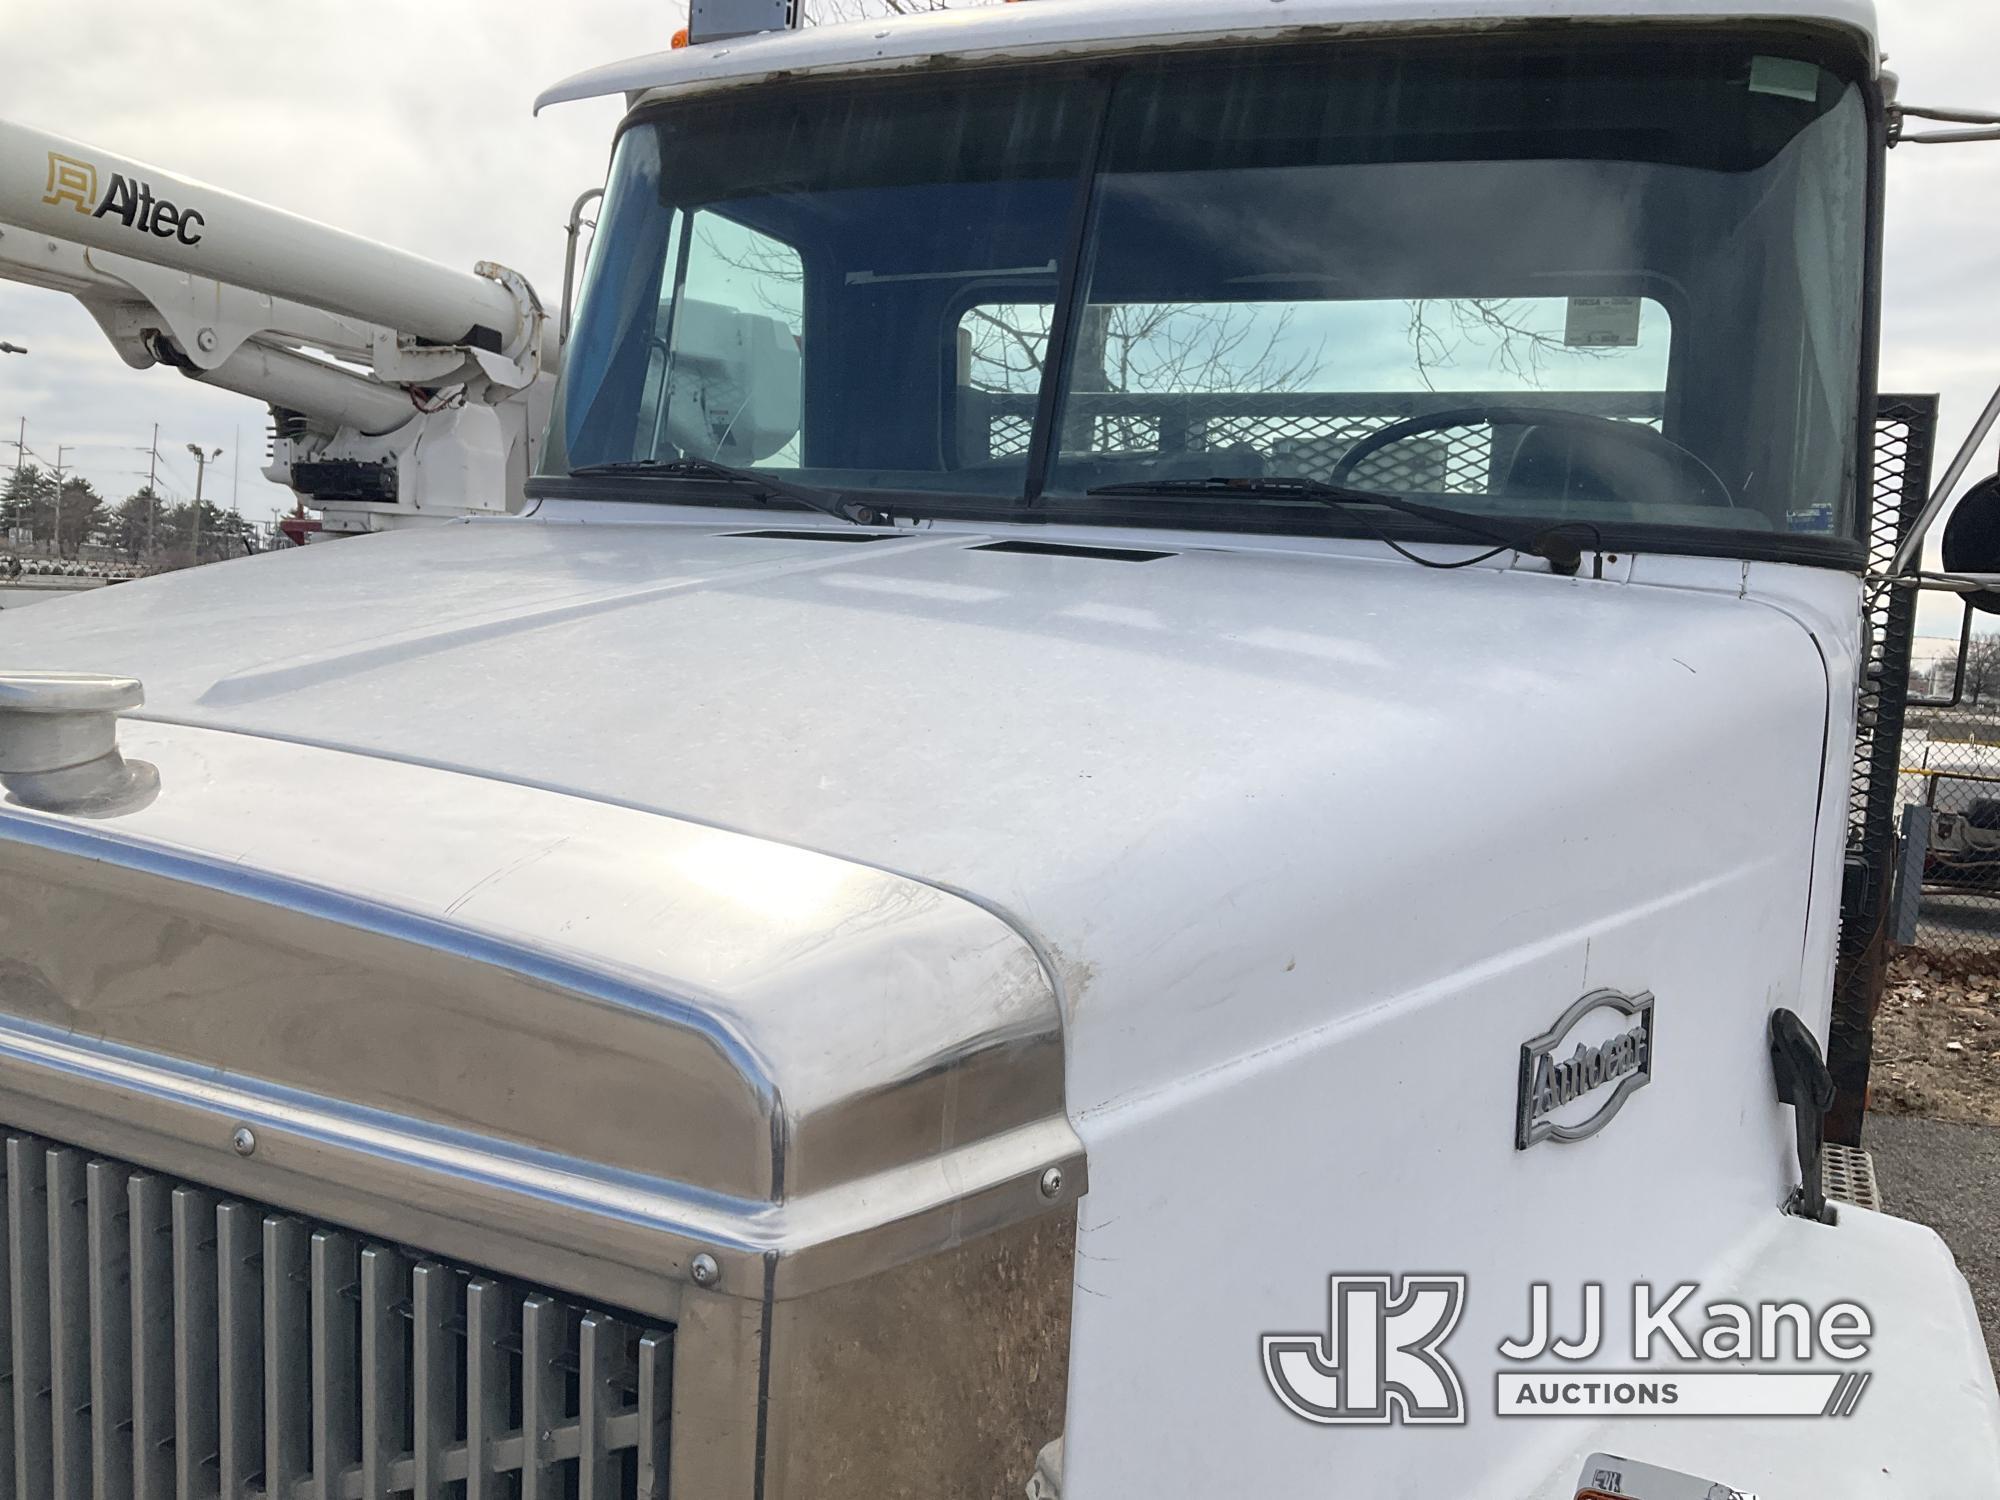 (Kansas City, MO) 1990 WhiteGMC ACL T/A Flatbed Truck Non-Running, Condition Unknown) (Slow To Crank